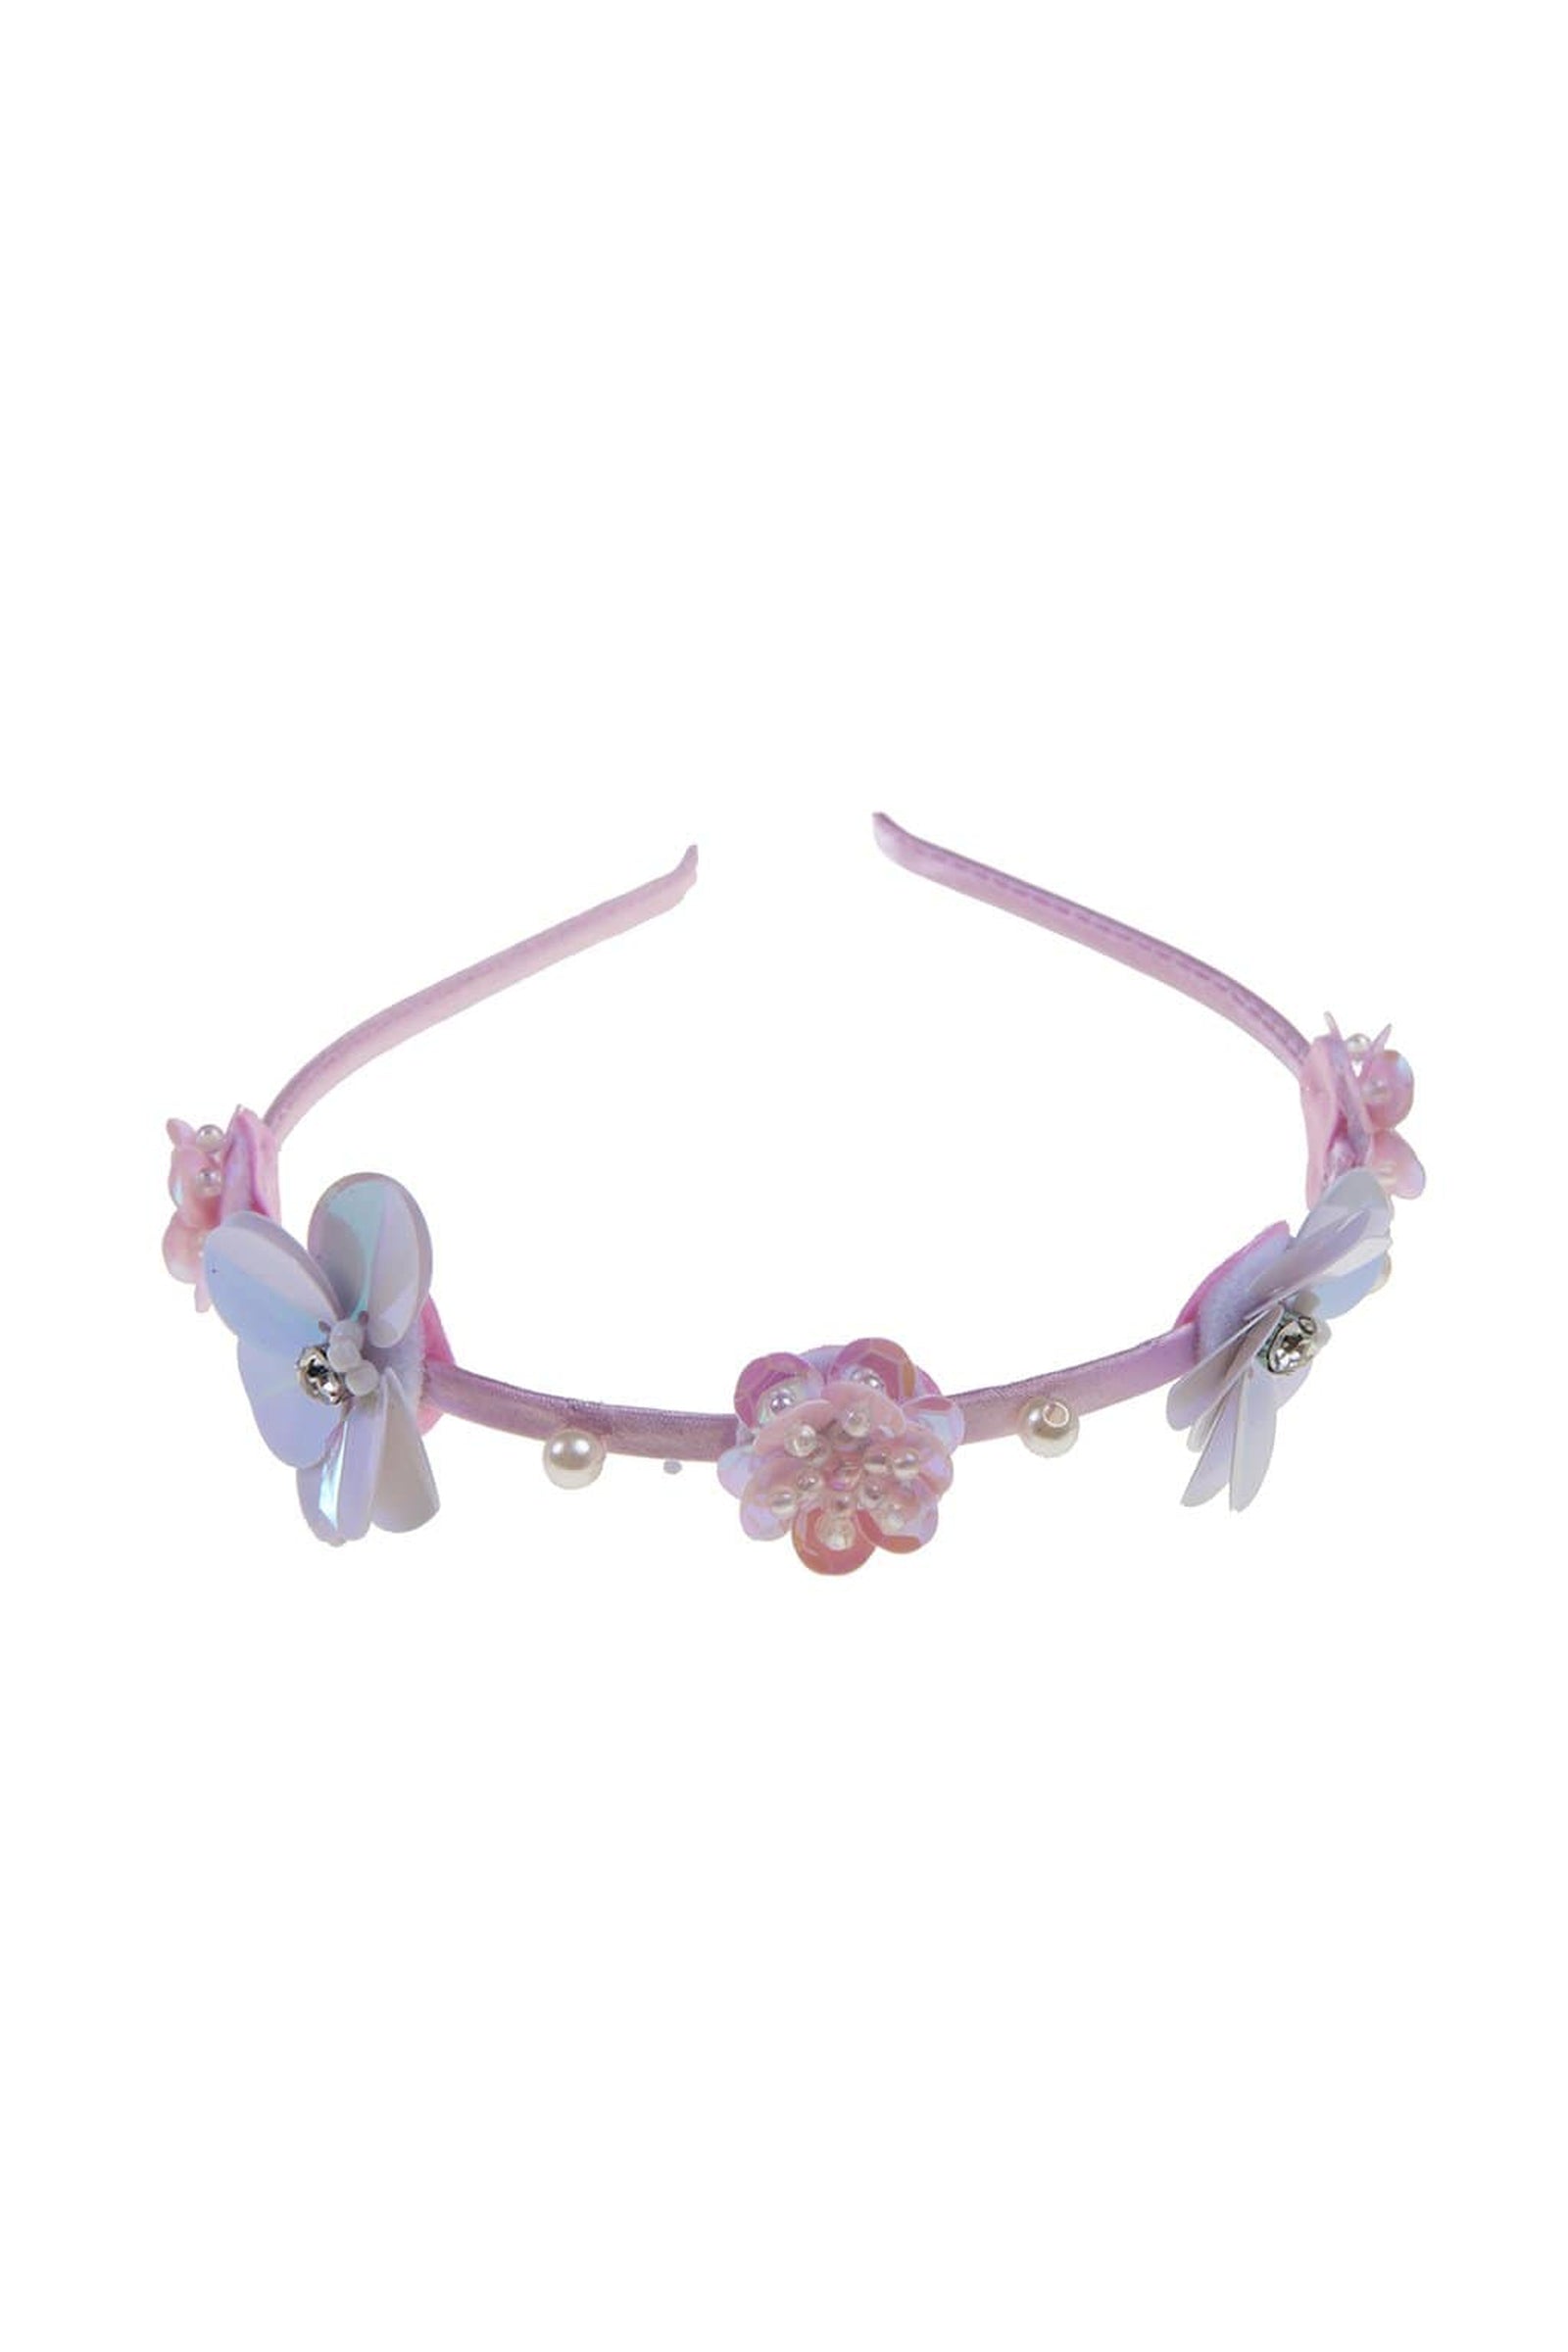 Flowers in the Clouds Headband